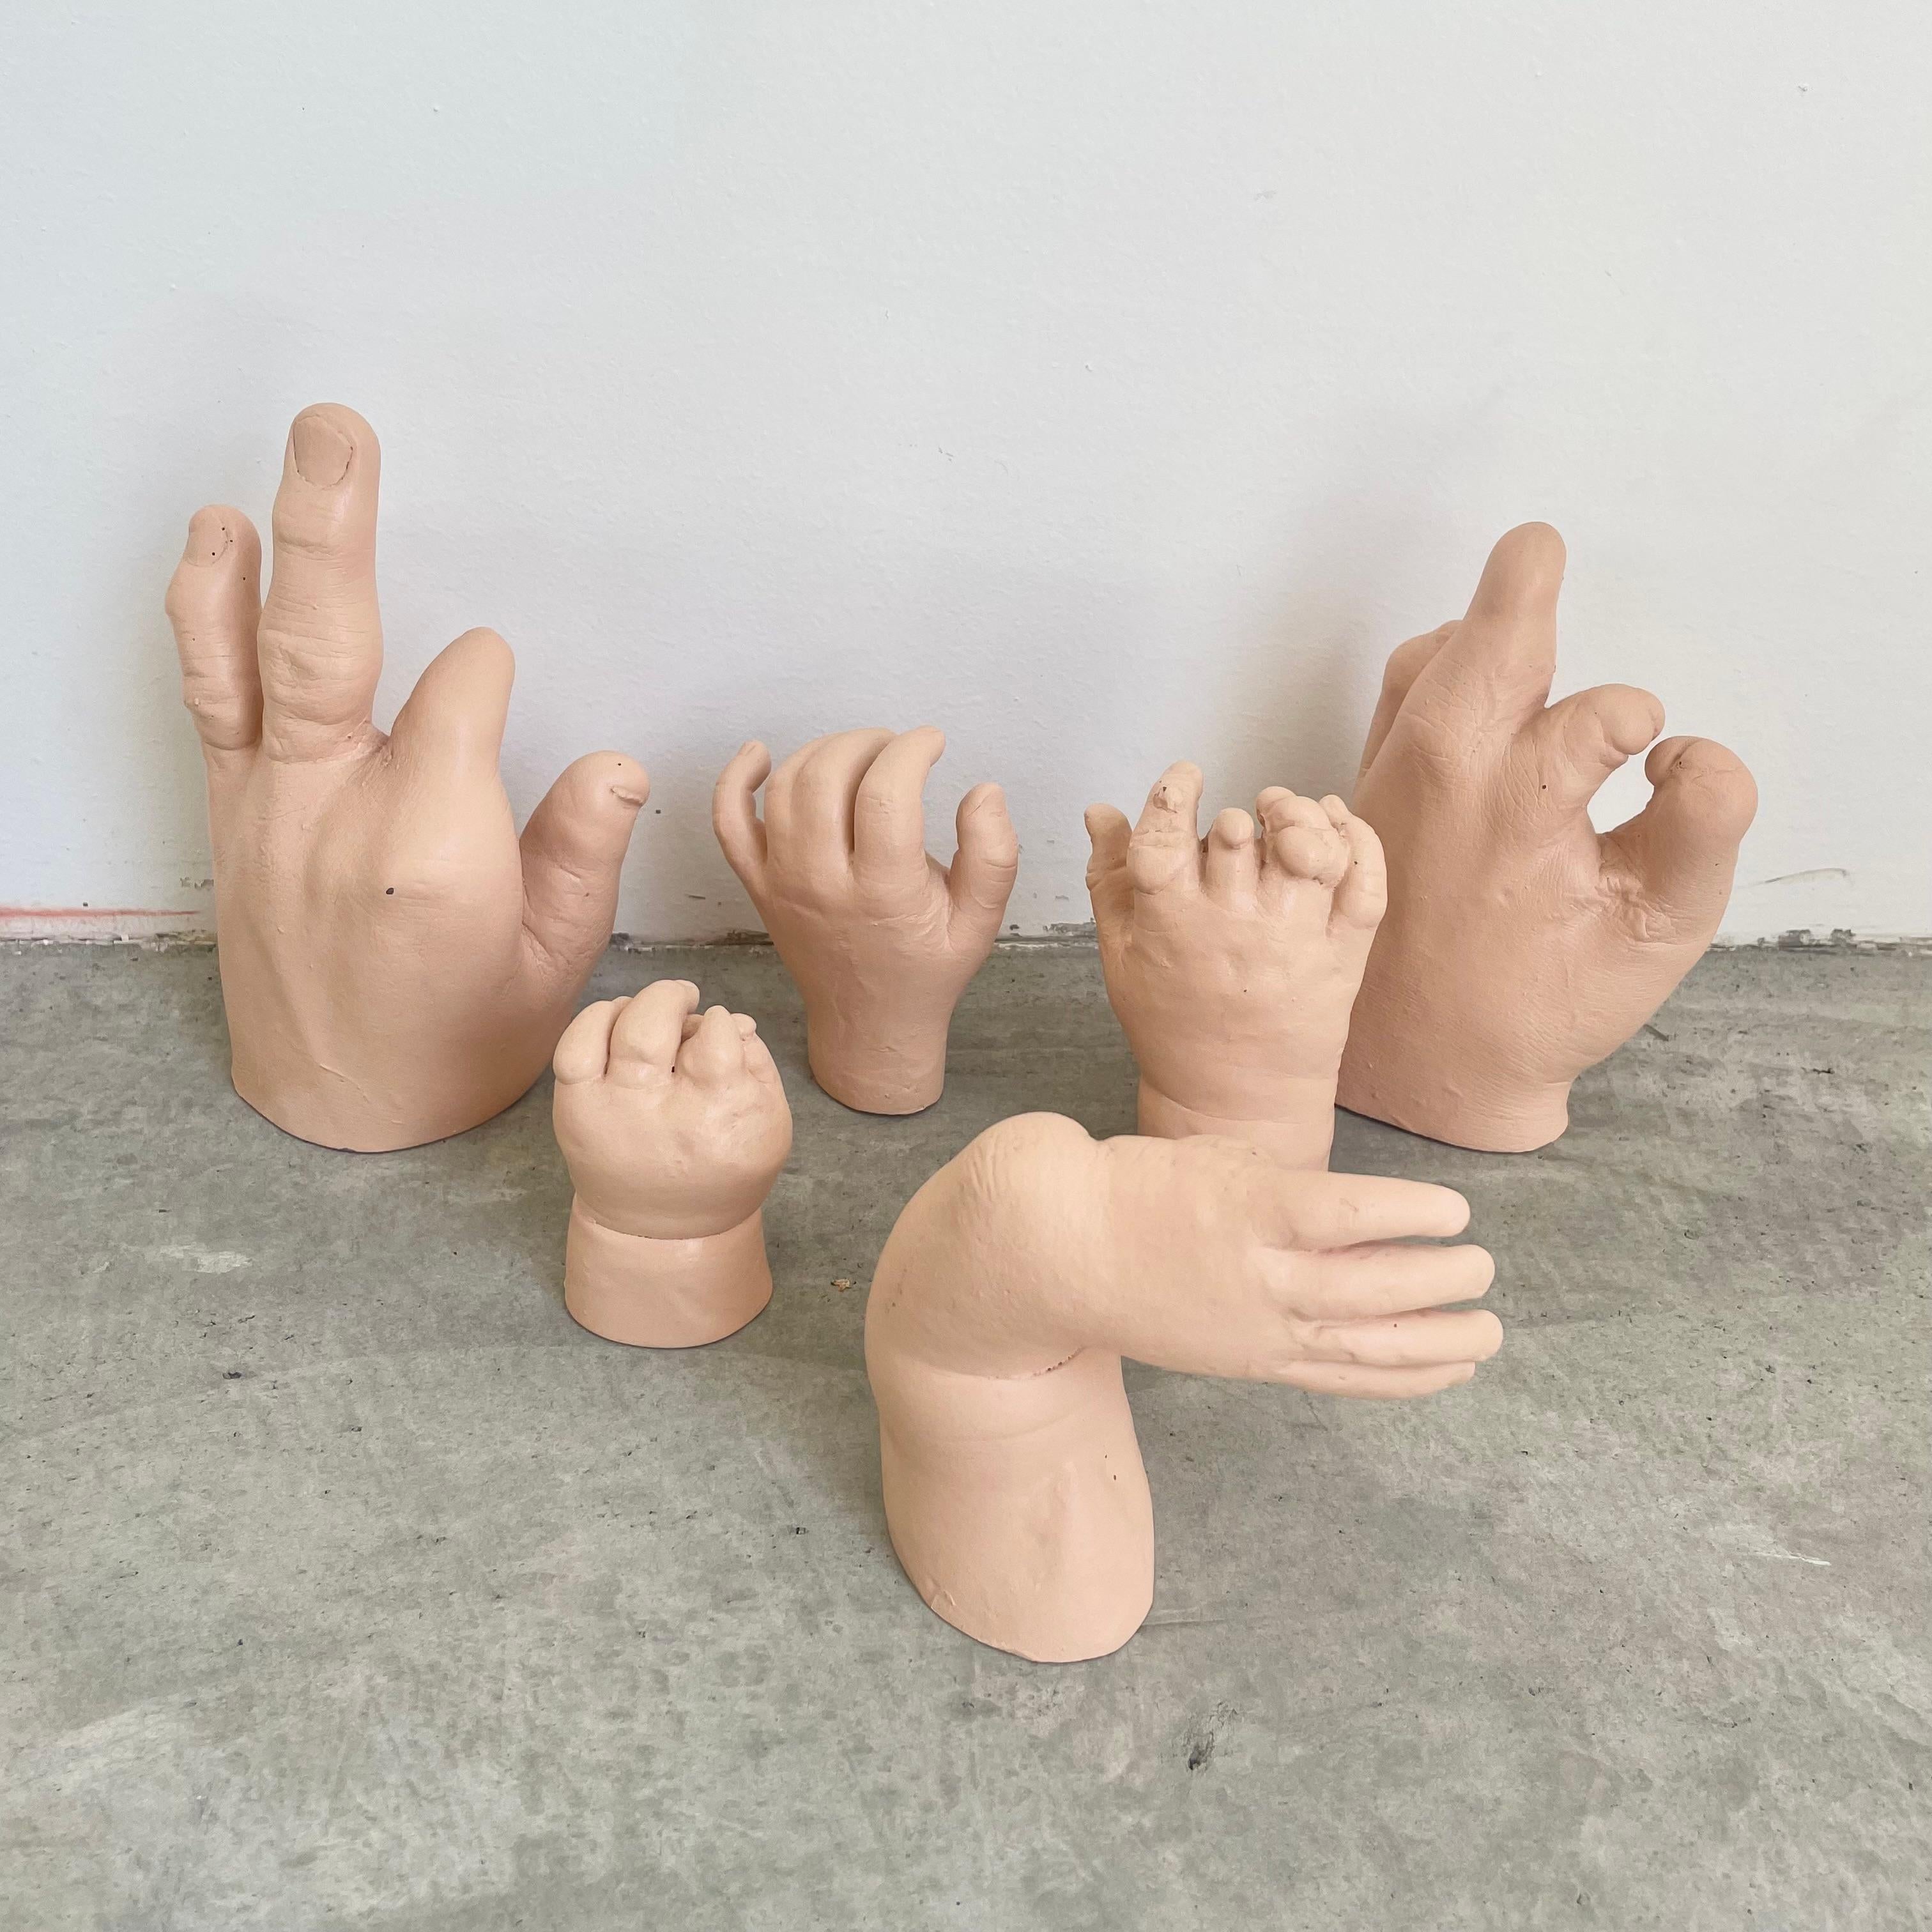 Six anatomical plaster casts of deformed hands.

No provenance, however it seems likely they were used for anatomical studies or in a museum - the Boston Science Museum has some very similar casts on display.

All hand painted in skin tone colour